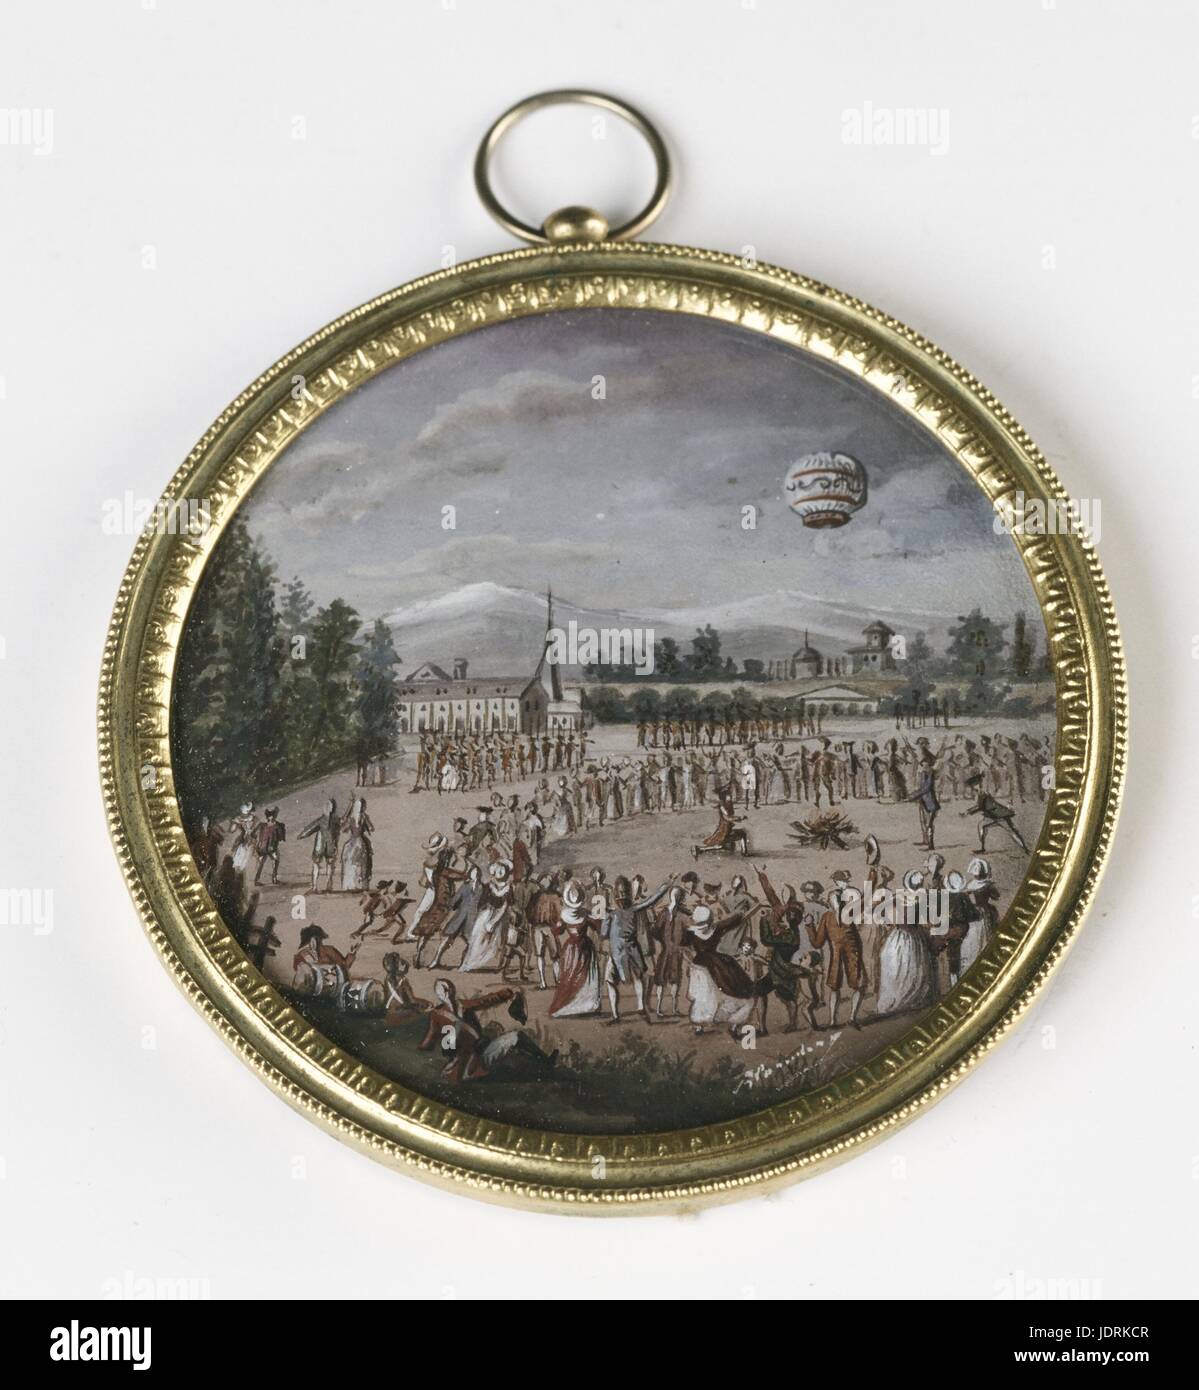 Small framed painting  Montgolfier brothers' first public aerostatic experiment in Annonay on 4th June 1783  Gouache (diameter 8.5 cm)  Muller-Quênot Collection Since December 1782, Joseph-Michel et Etienne Montgolfier carried out aeronautical experiments sometimes in the afternoons and during the night within the boundaries of the family paper mill. With the pressure from their associates and the insistent rumour about the 'curious' engine, Etienne et Joseph-Michel cancelled its initial launch date on 4th June 1783, to hold a public experiment in front of the Membres des Etats Particuliers of Stock Photo